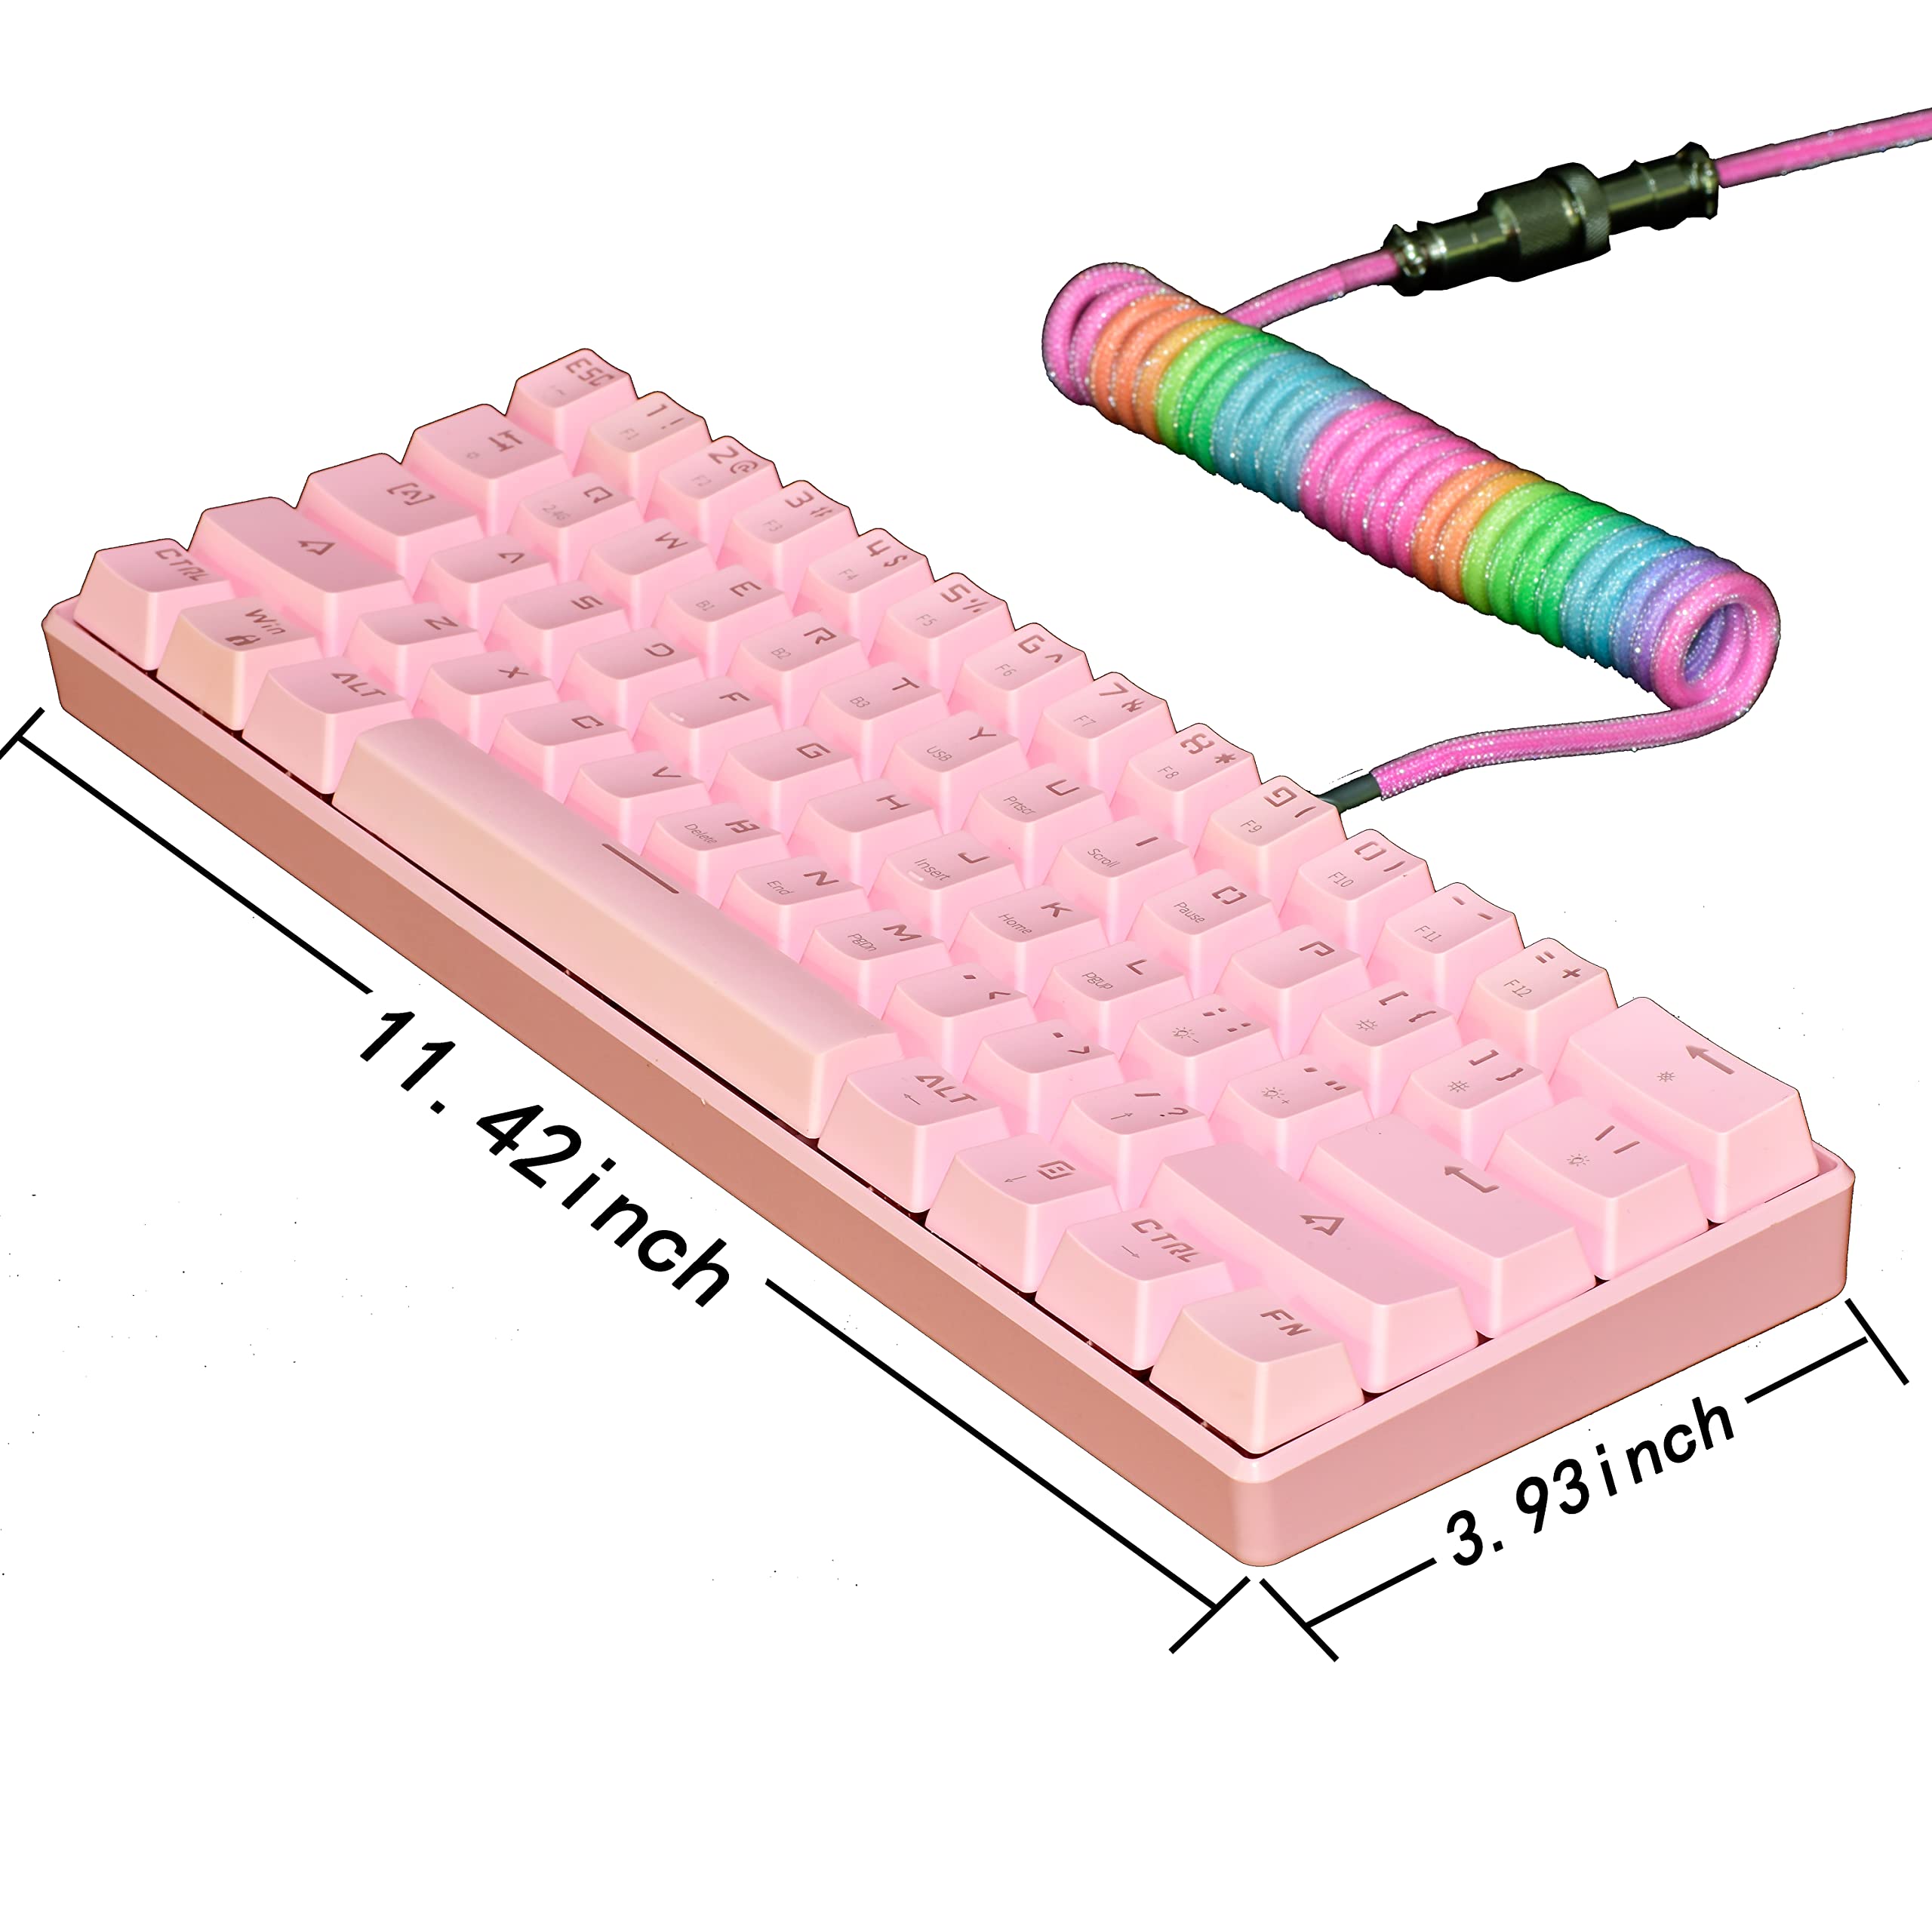 CHICHEN 60% Mechanical Keyboard Three Models Compact with BT5.0/2.4G/USB-C,61 Keys Both Wired/Wireless RGB Backlit Gaming Keyboard,Portable Mini Keyboard for PC/Mac Typist, Travel(Blue Switch,Pink)